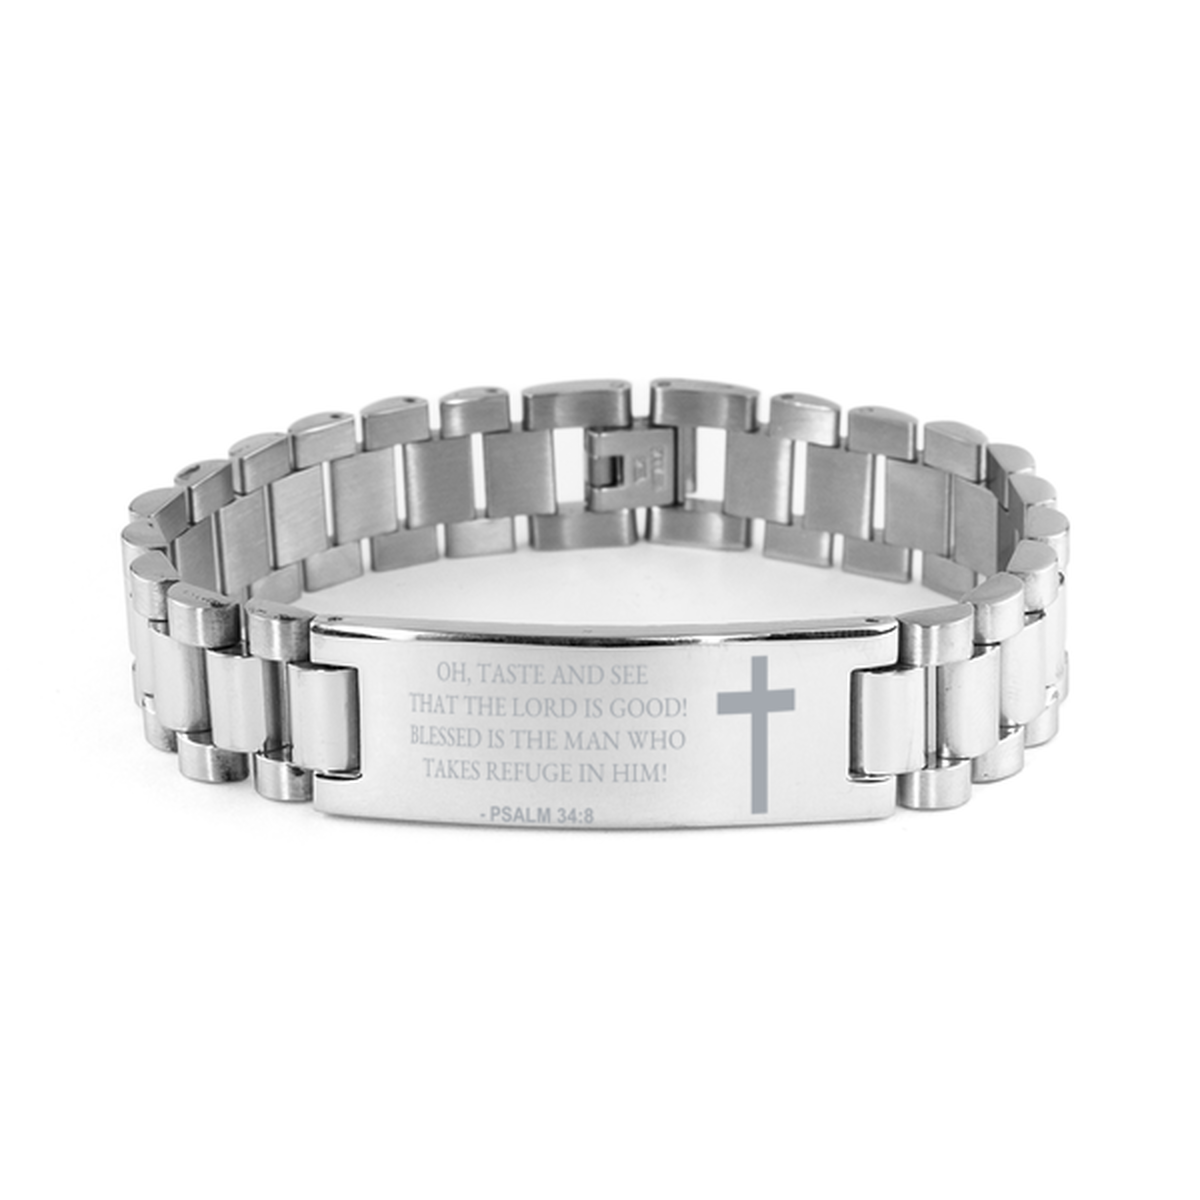 Christian Ladder Stainless Steel Bracelet, Psalm 34:8 Oh, Taste And See That The Lord Is Good! Blessed, Motivational Bible Verse Gifts For Men Women